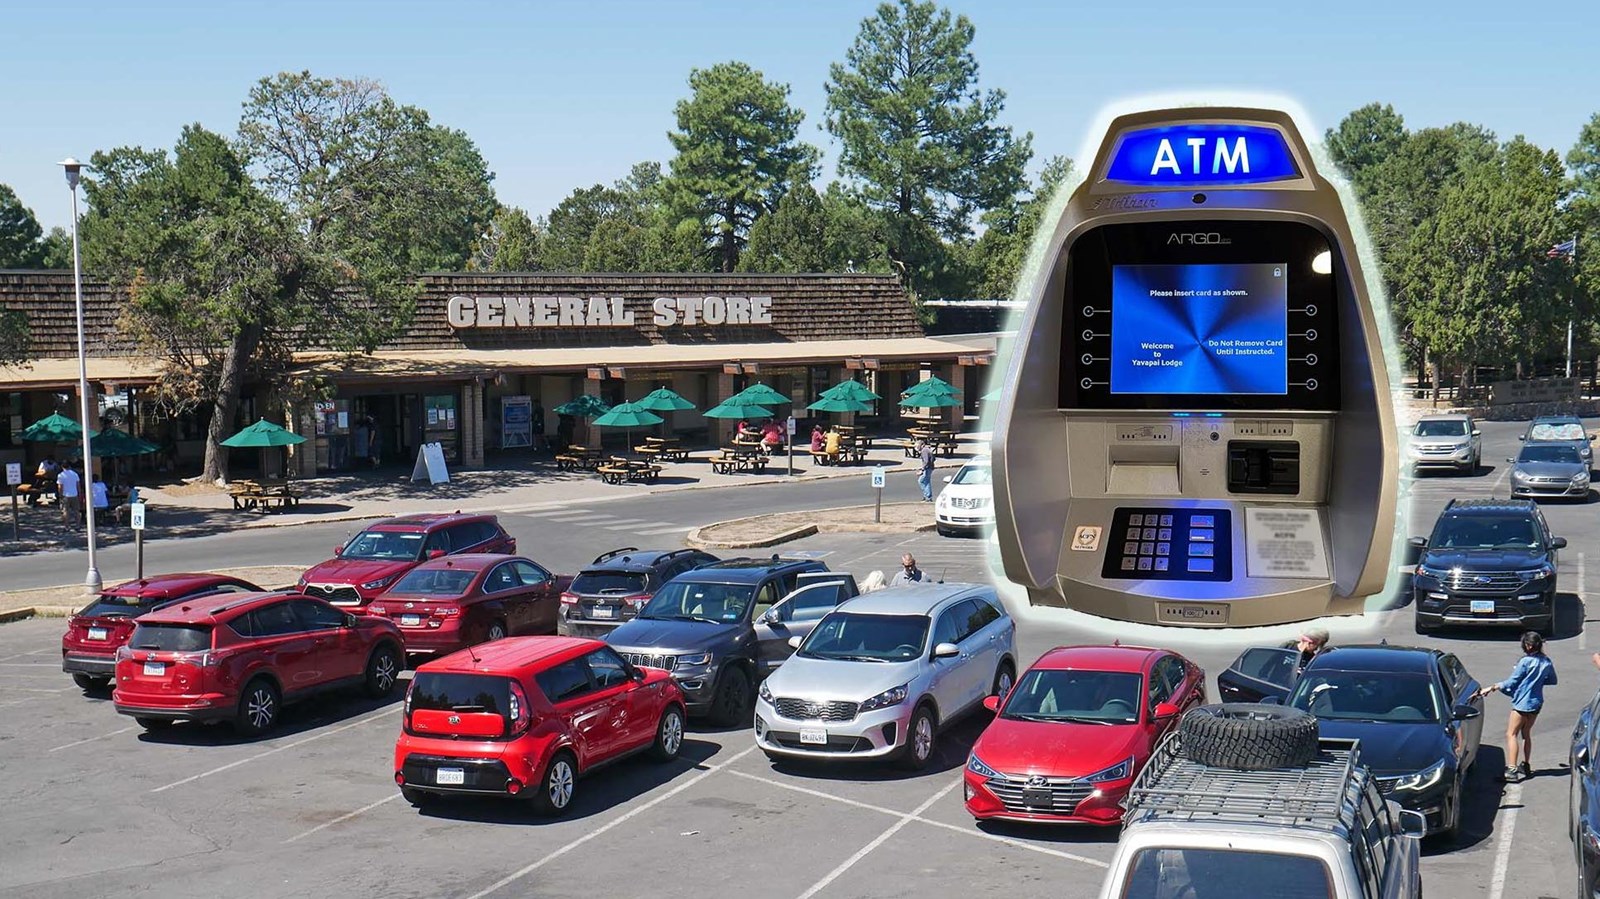 Superimposed ATM above cars in a parking lot with a brown general store building in the background